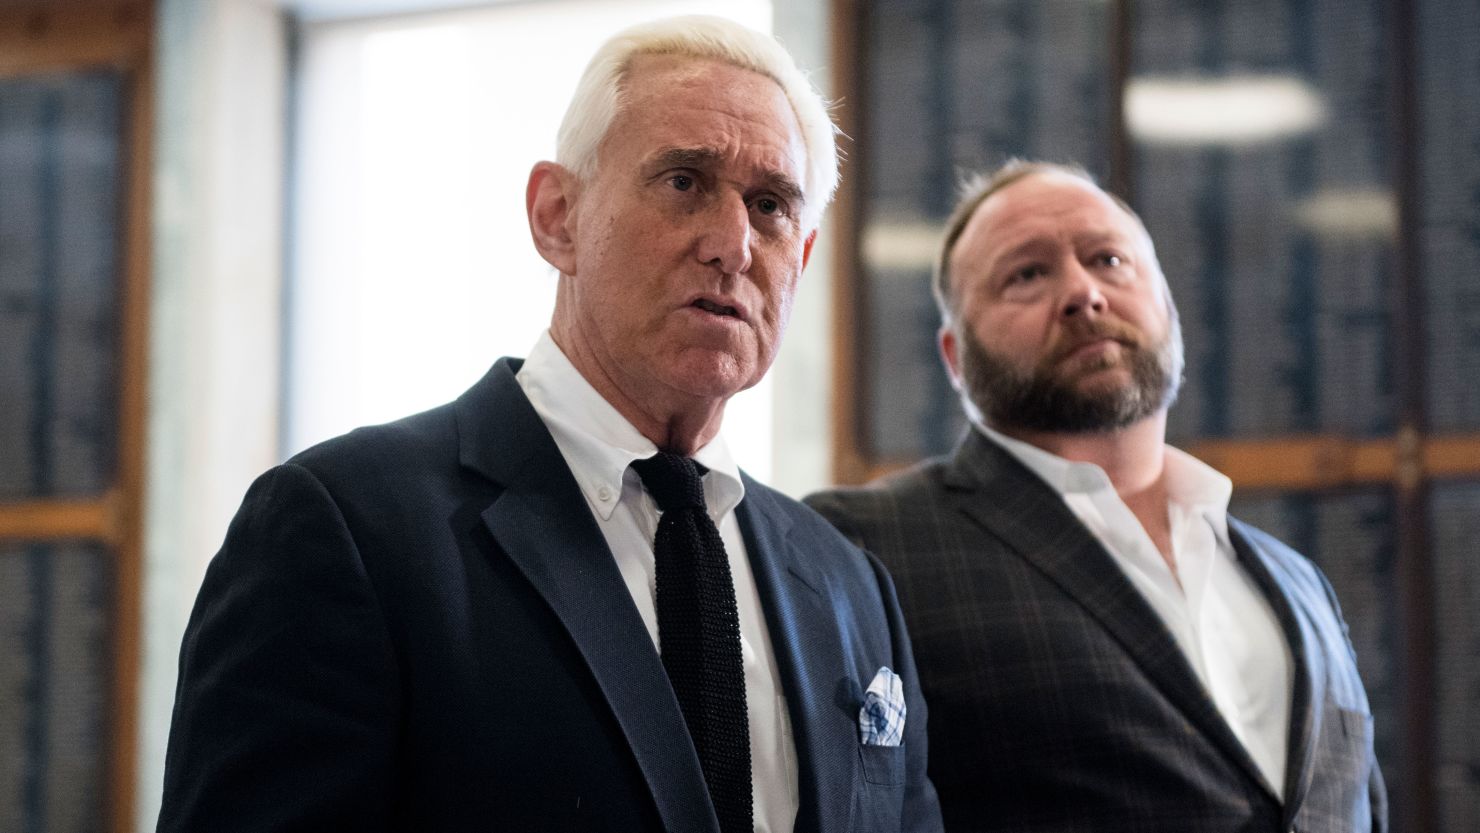 Roger Stone and Alex Jones have been subpoenaed by the House select committee.